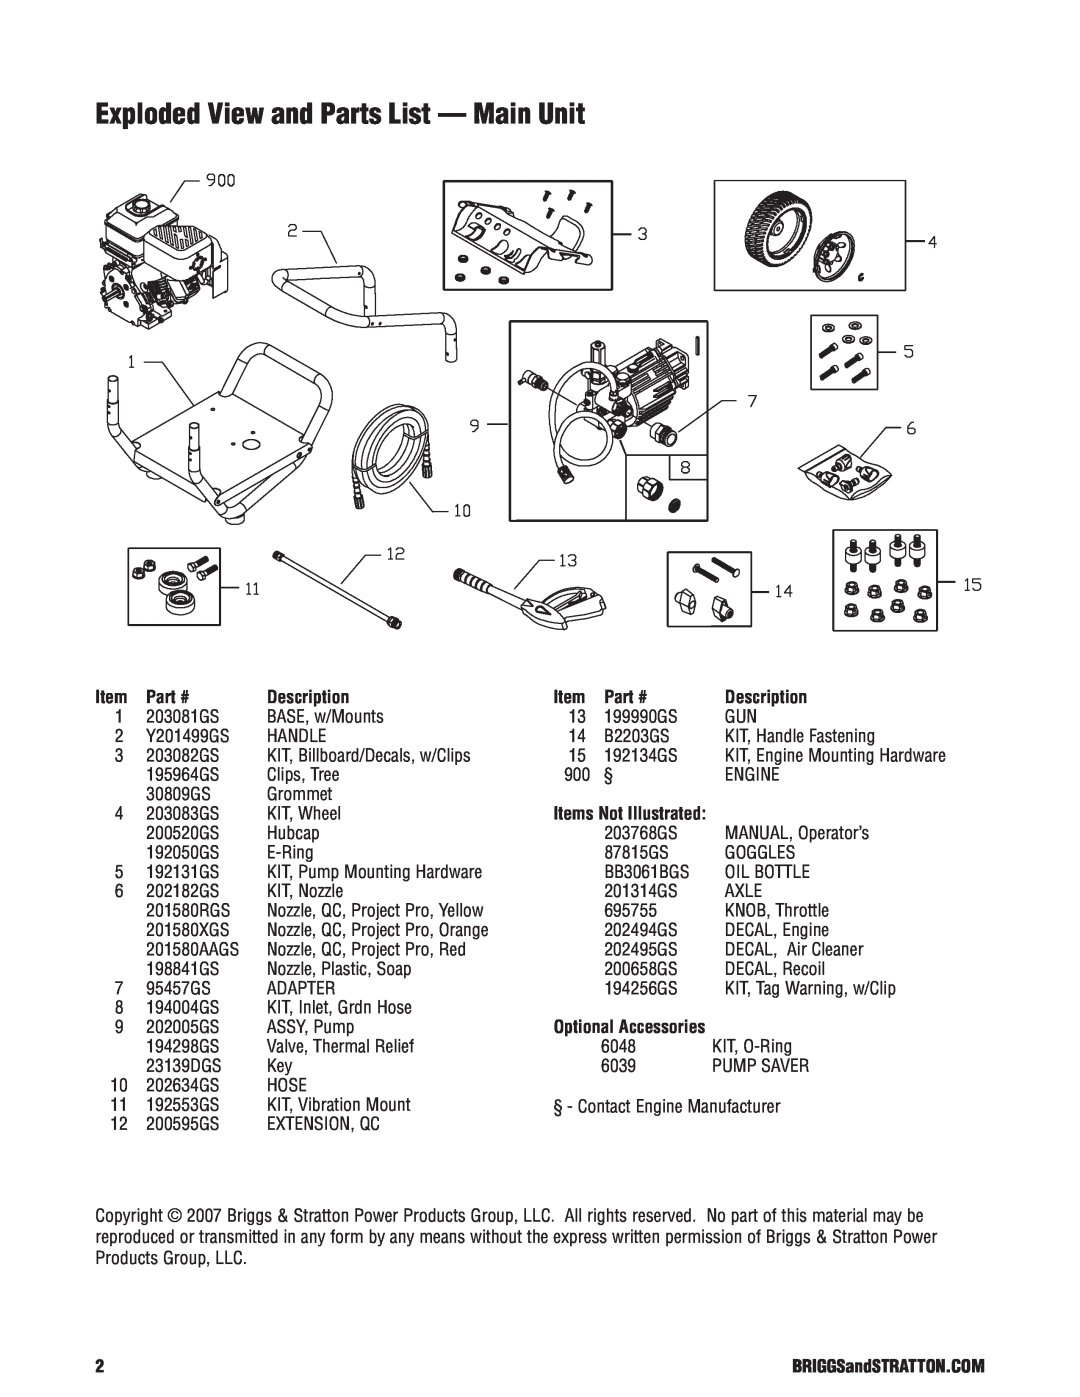 Briggs & Stratton 020274-1 manual Exploded View and Parts List - Main Unit, Description, Items Not Illustrated 